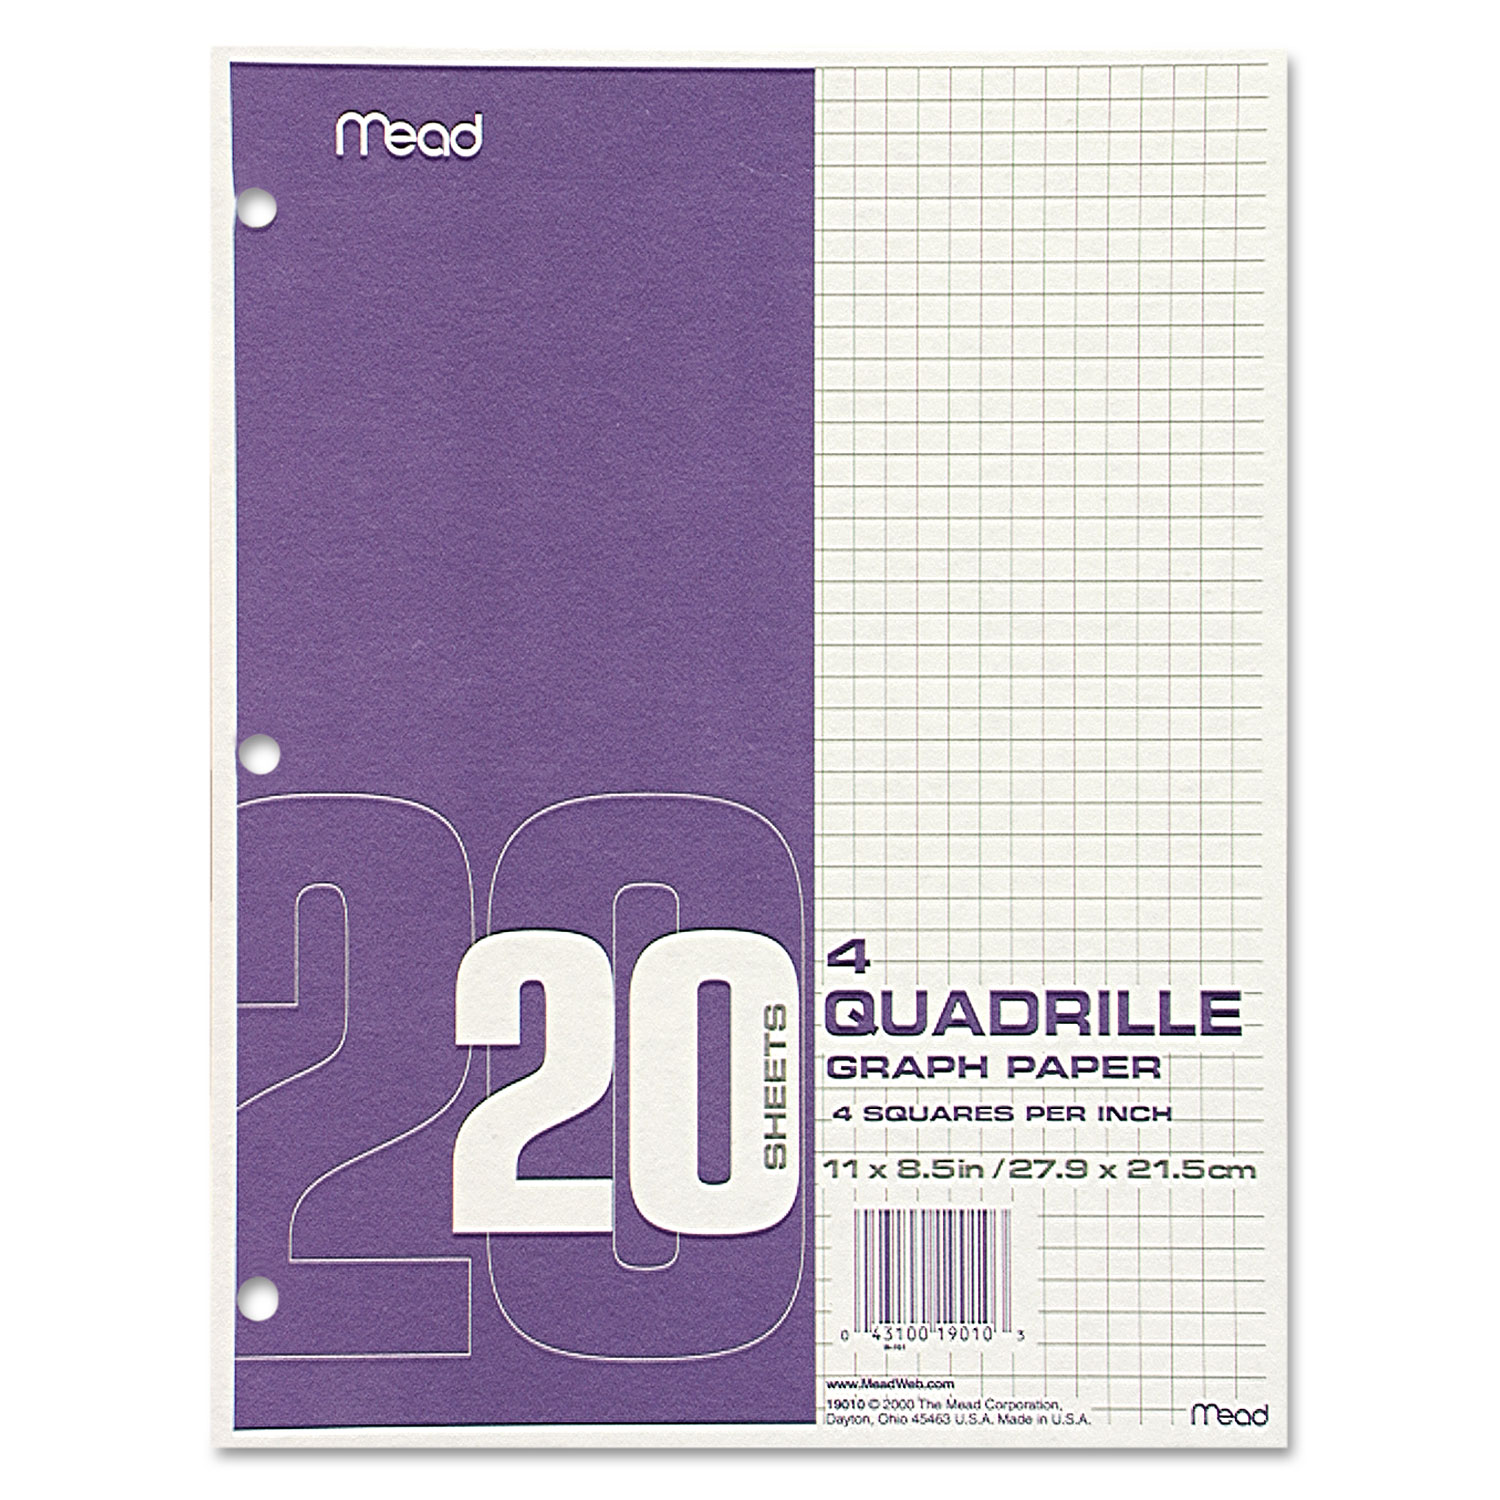  Mead 19010 Graph Paper Tablet, 3-Hole, 8.5 x 11, Quadrille: 4 sq/in, 20 Sheets/Pad, 12 Pads/Pack (MEA19010) 